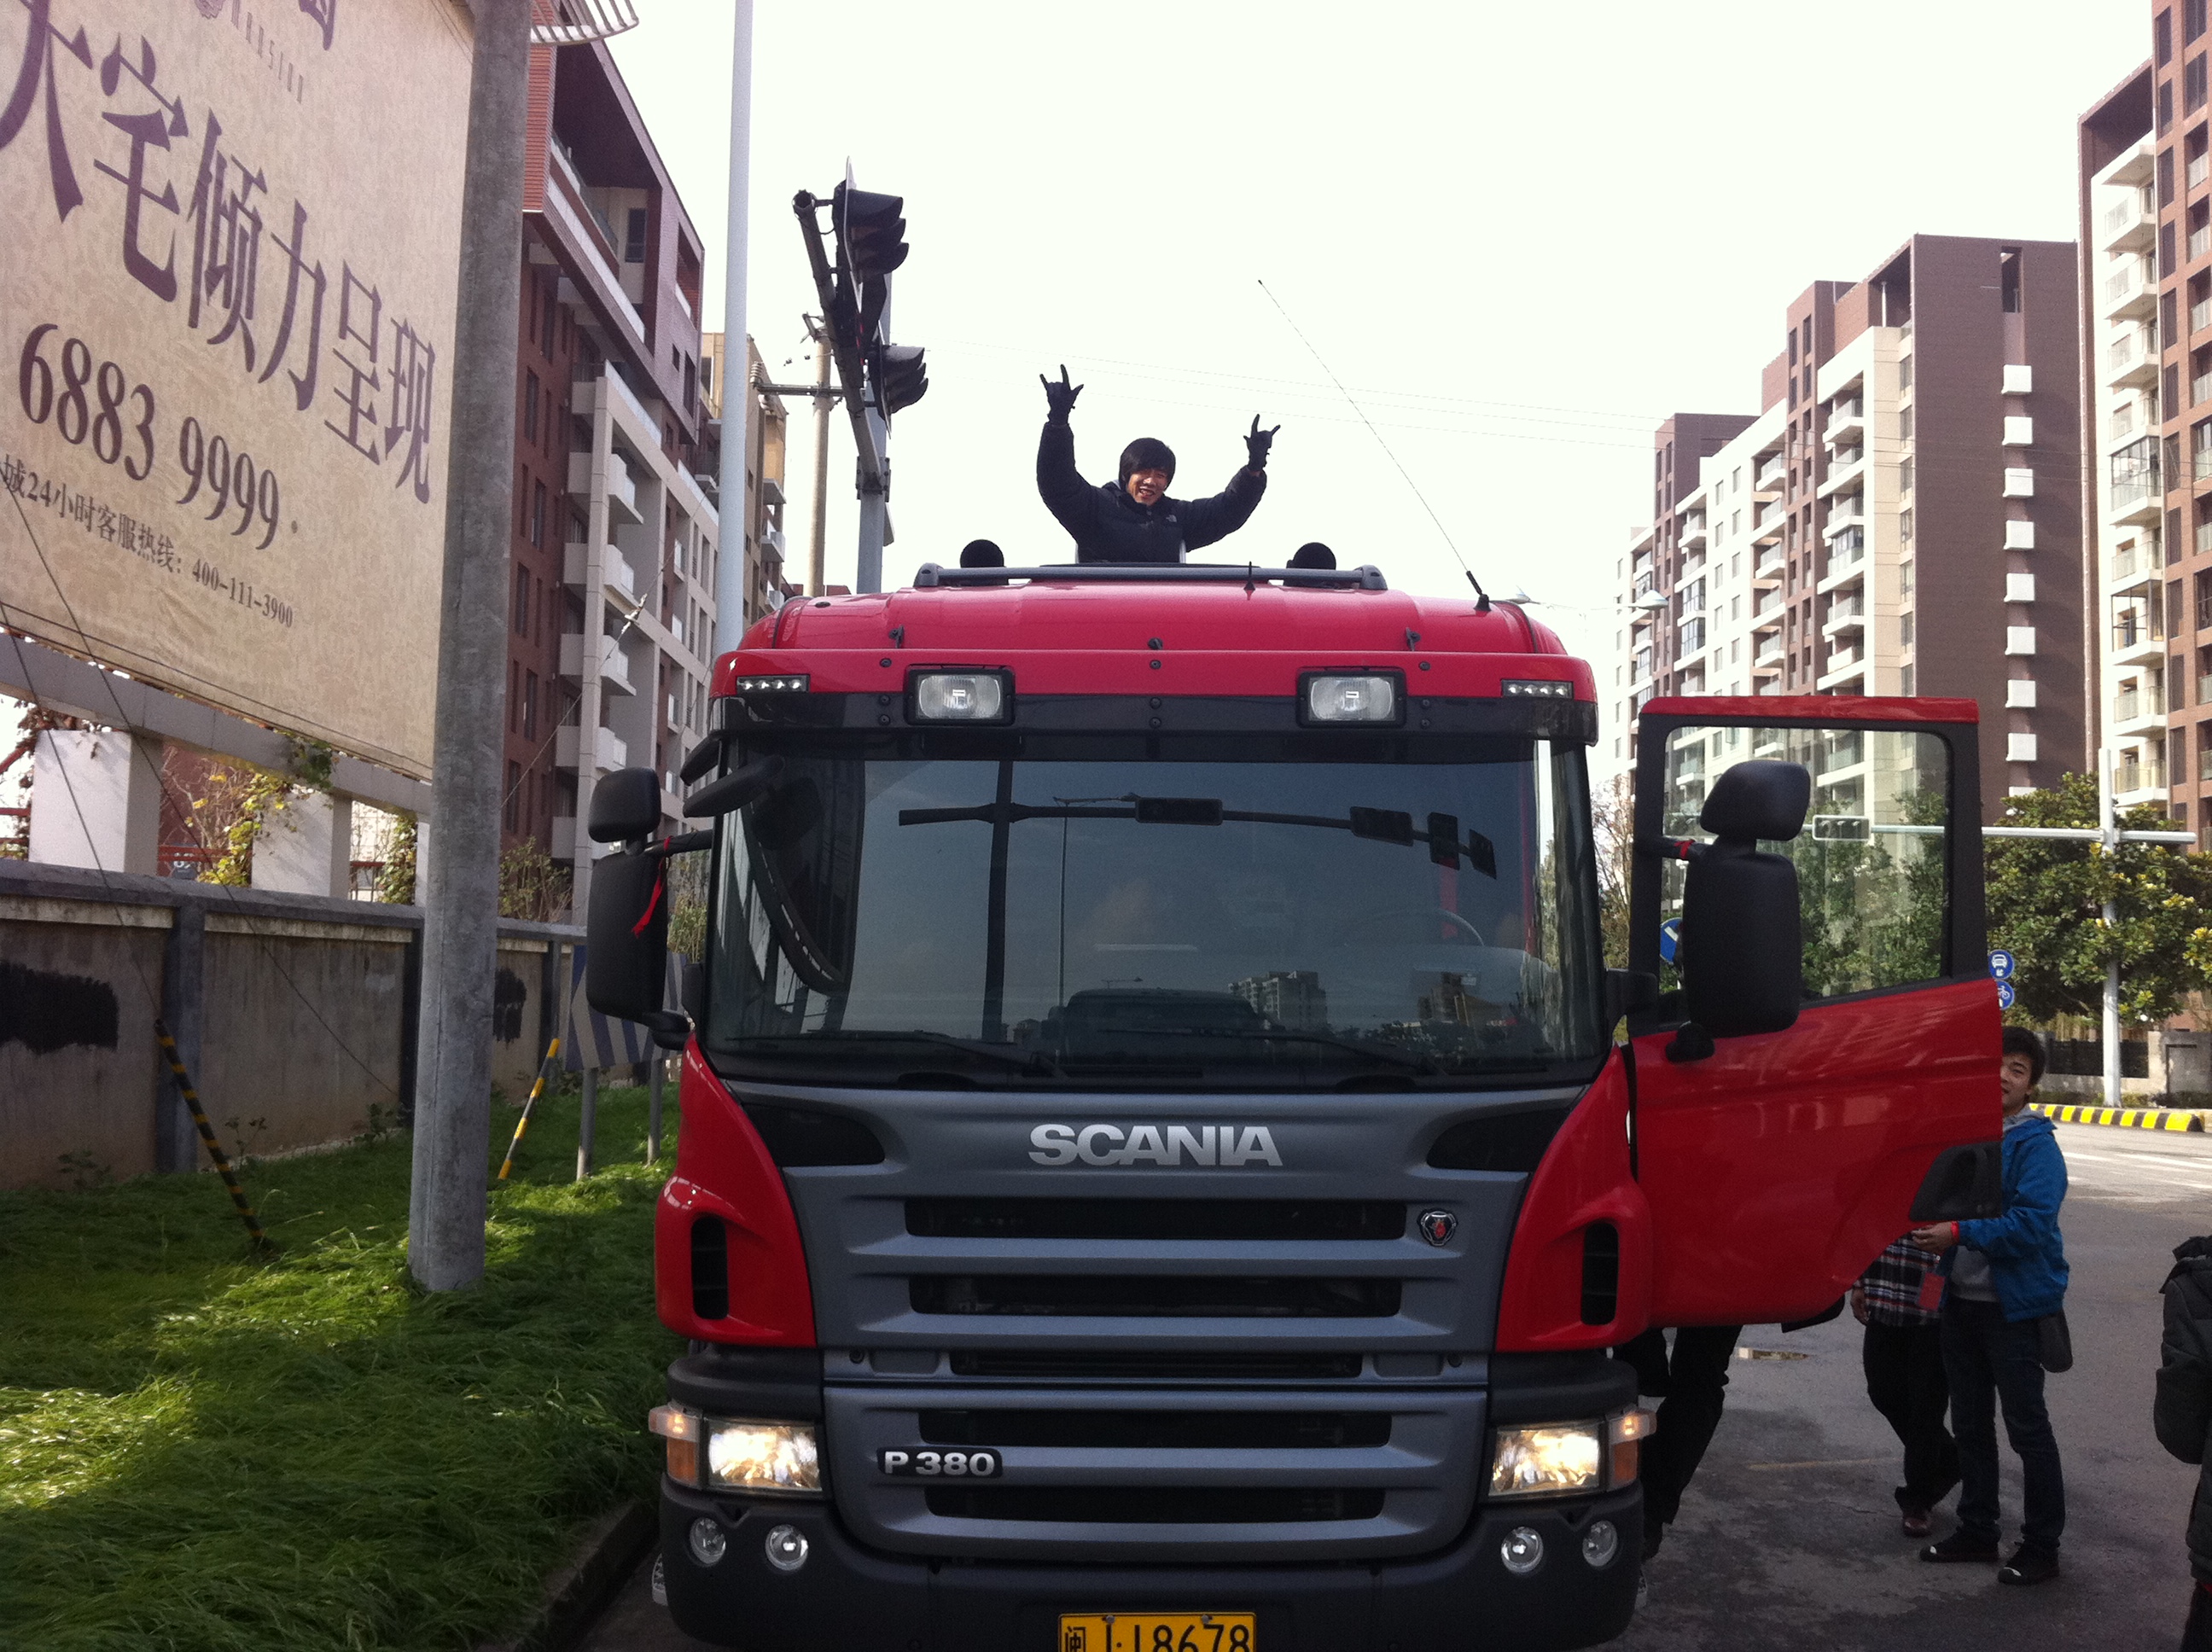 On location - the making of The Journey to the South (85min, China) - in Mandarin with Eng subtitles - to be released 2014